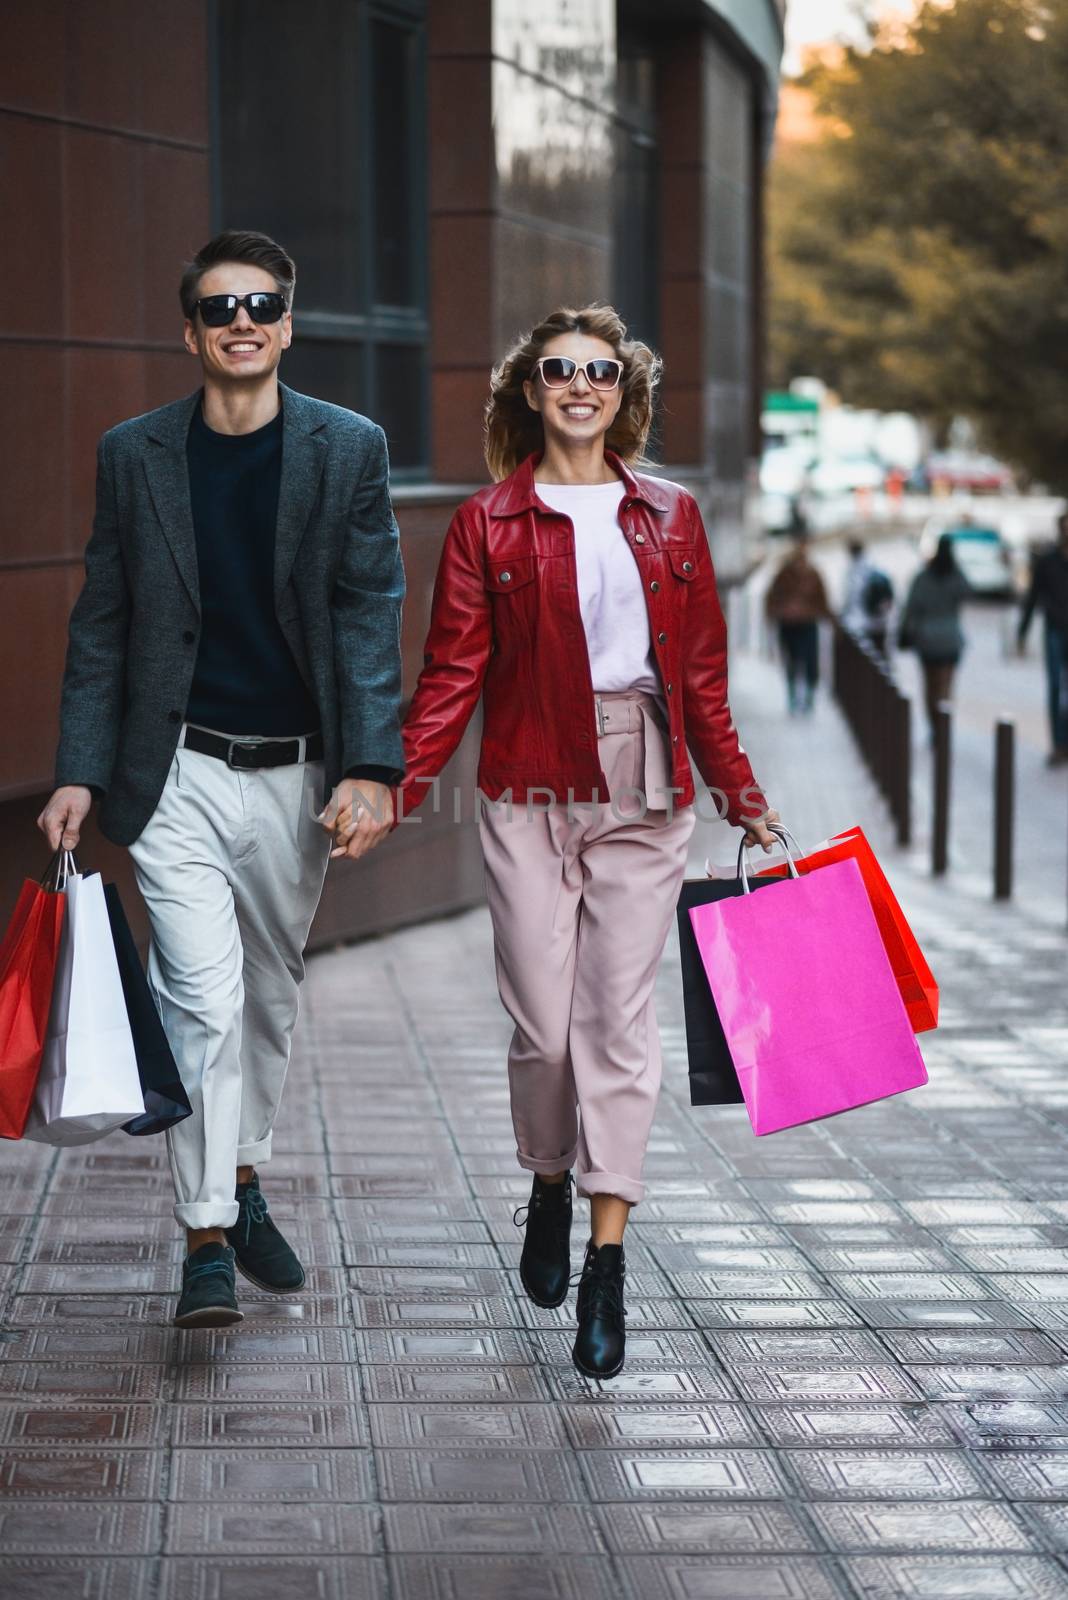 Couple in shopping together. Young couple holding hands and running through street.